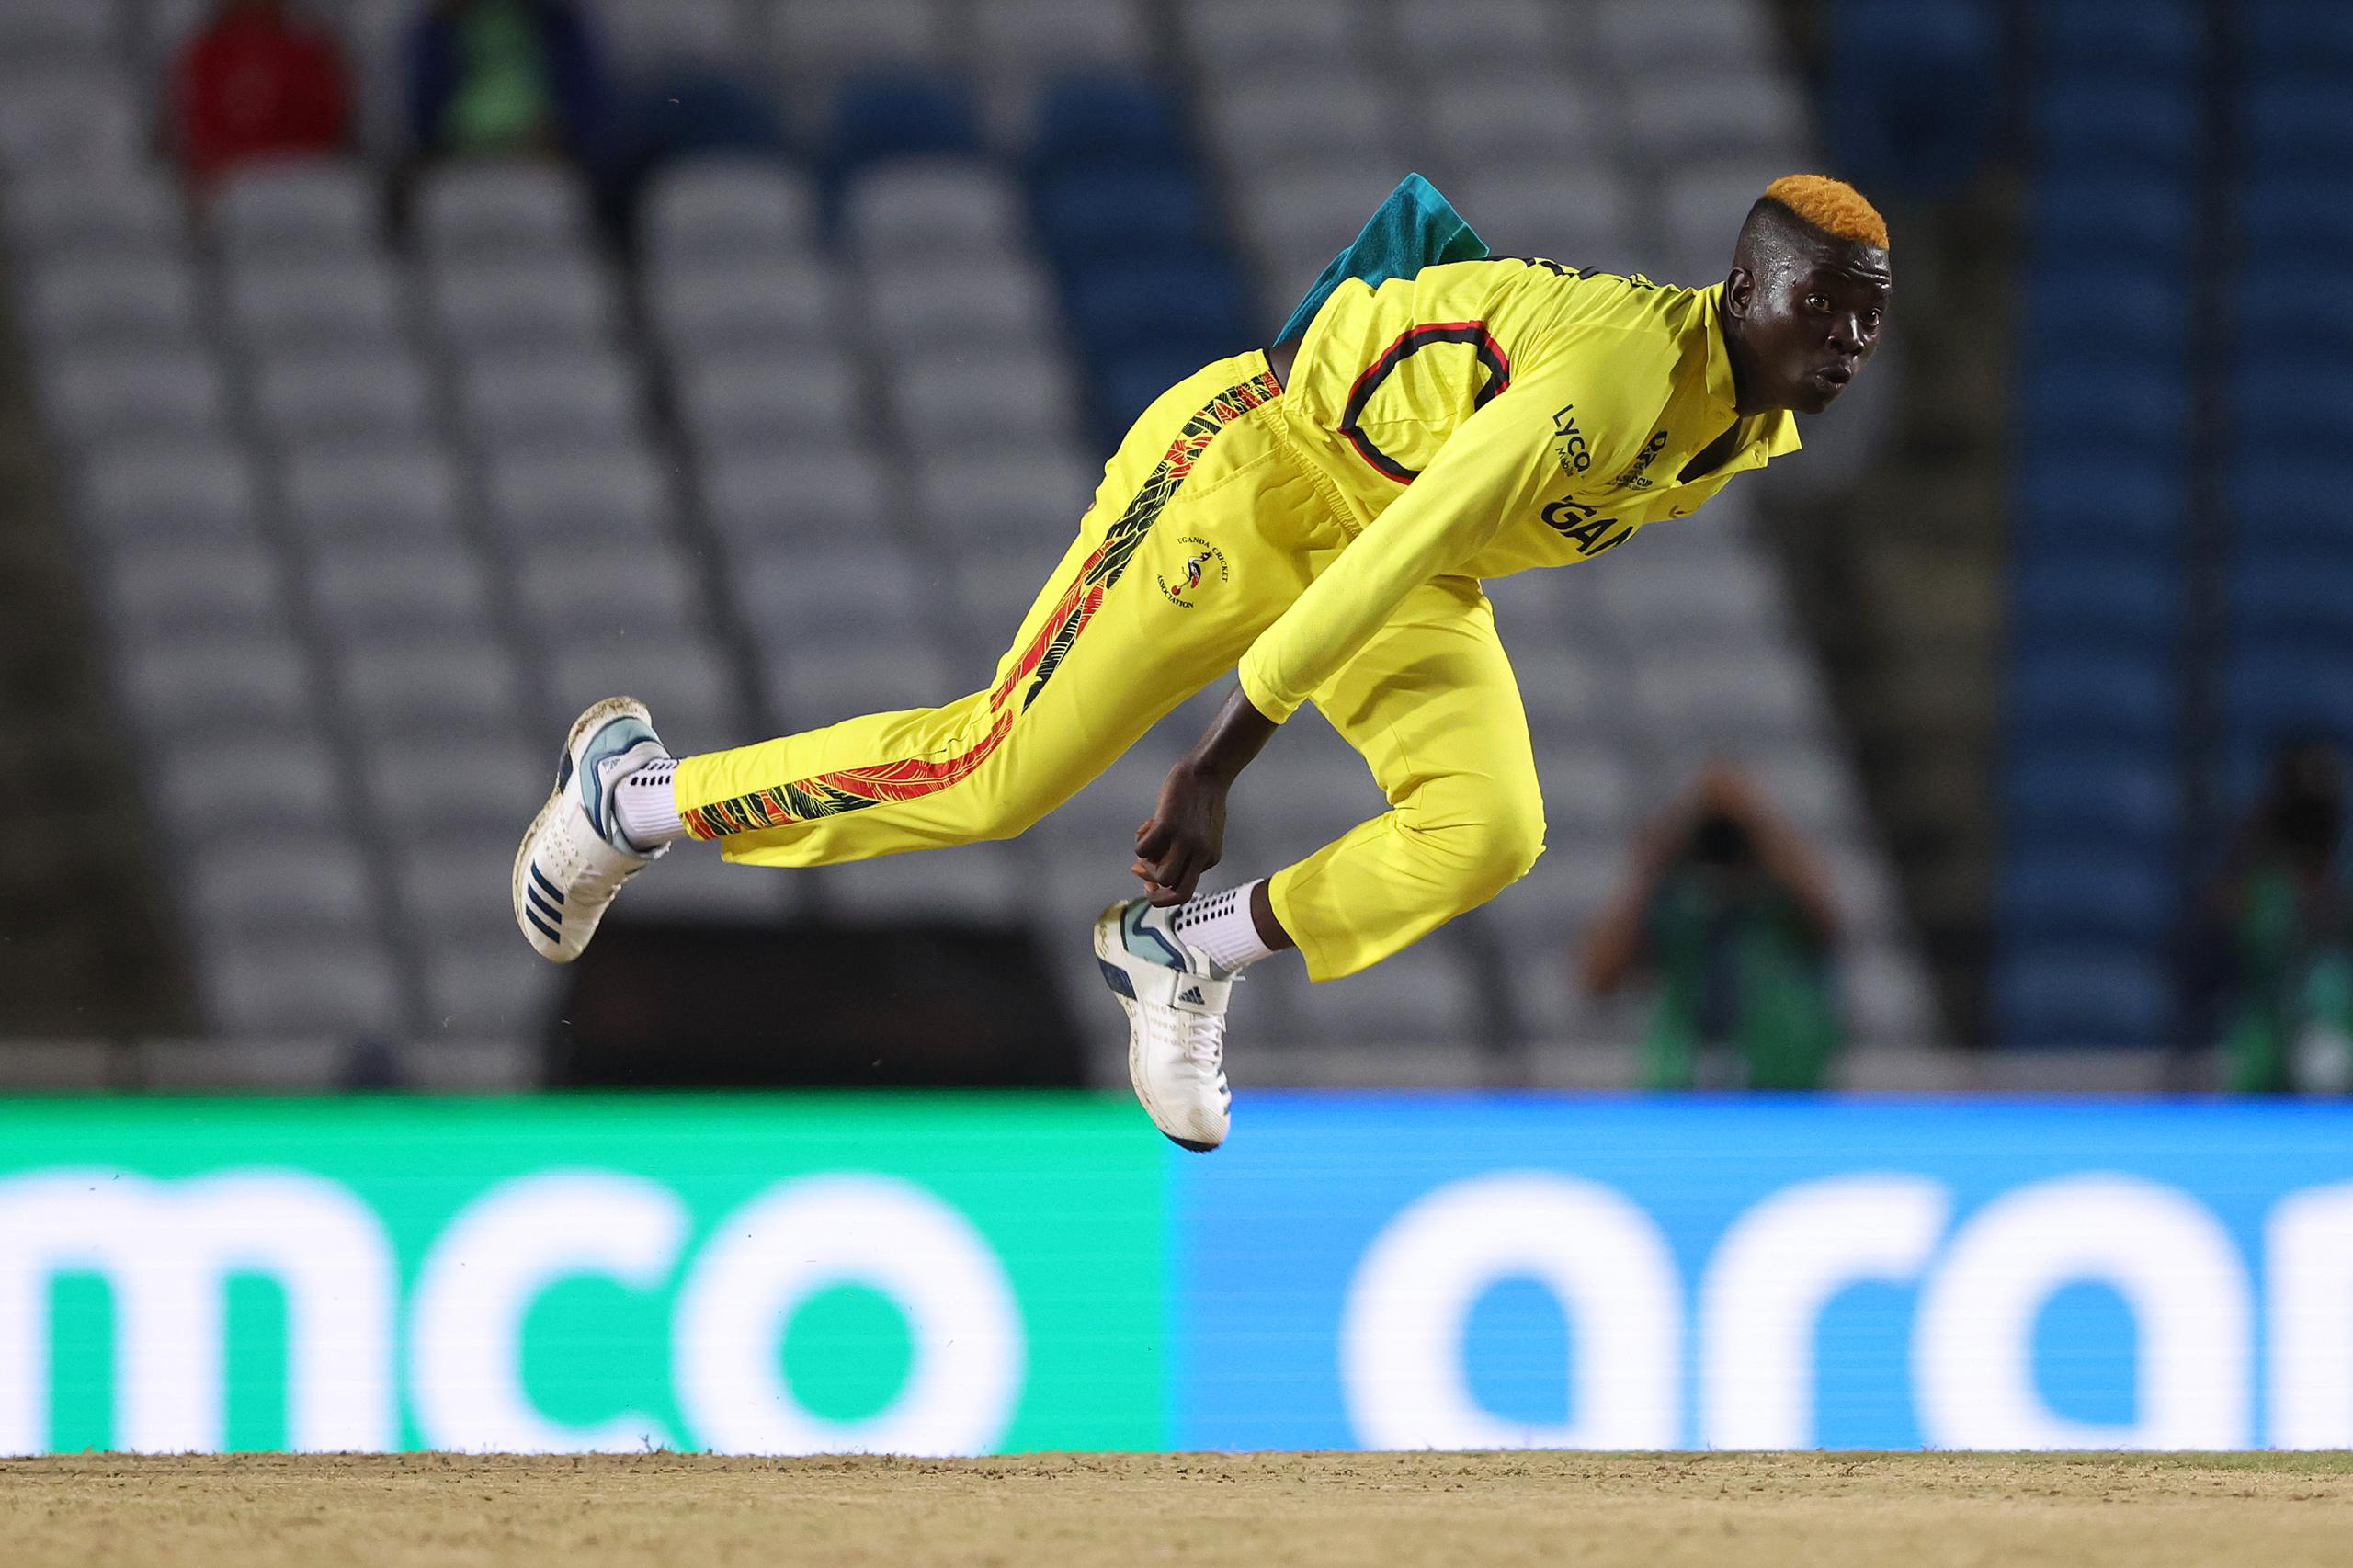 Cricket Cranes no match for Black Caps in final T20 World Cup game